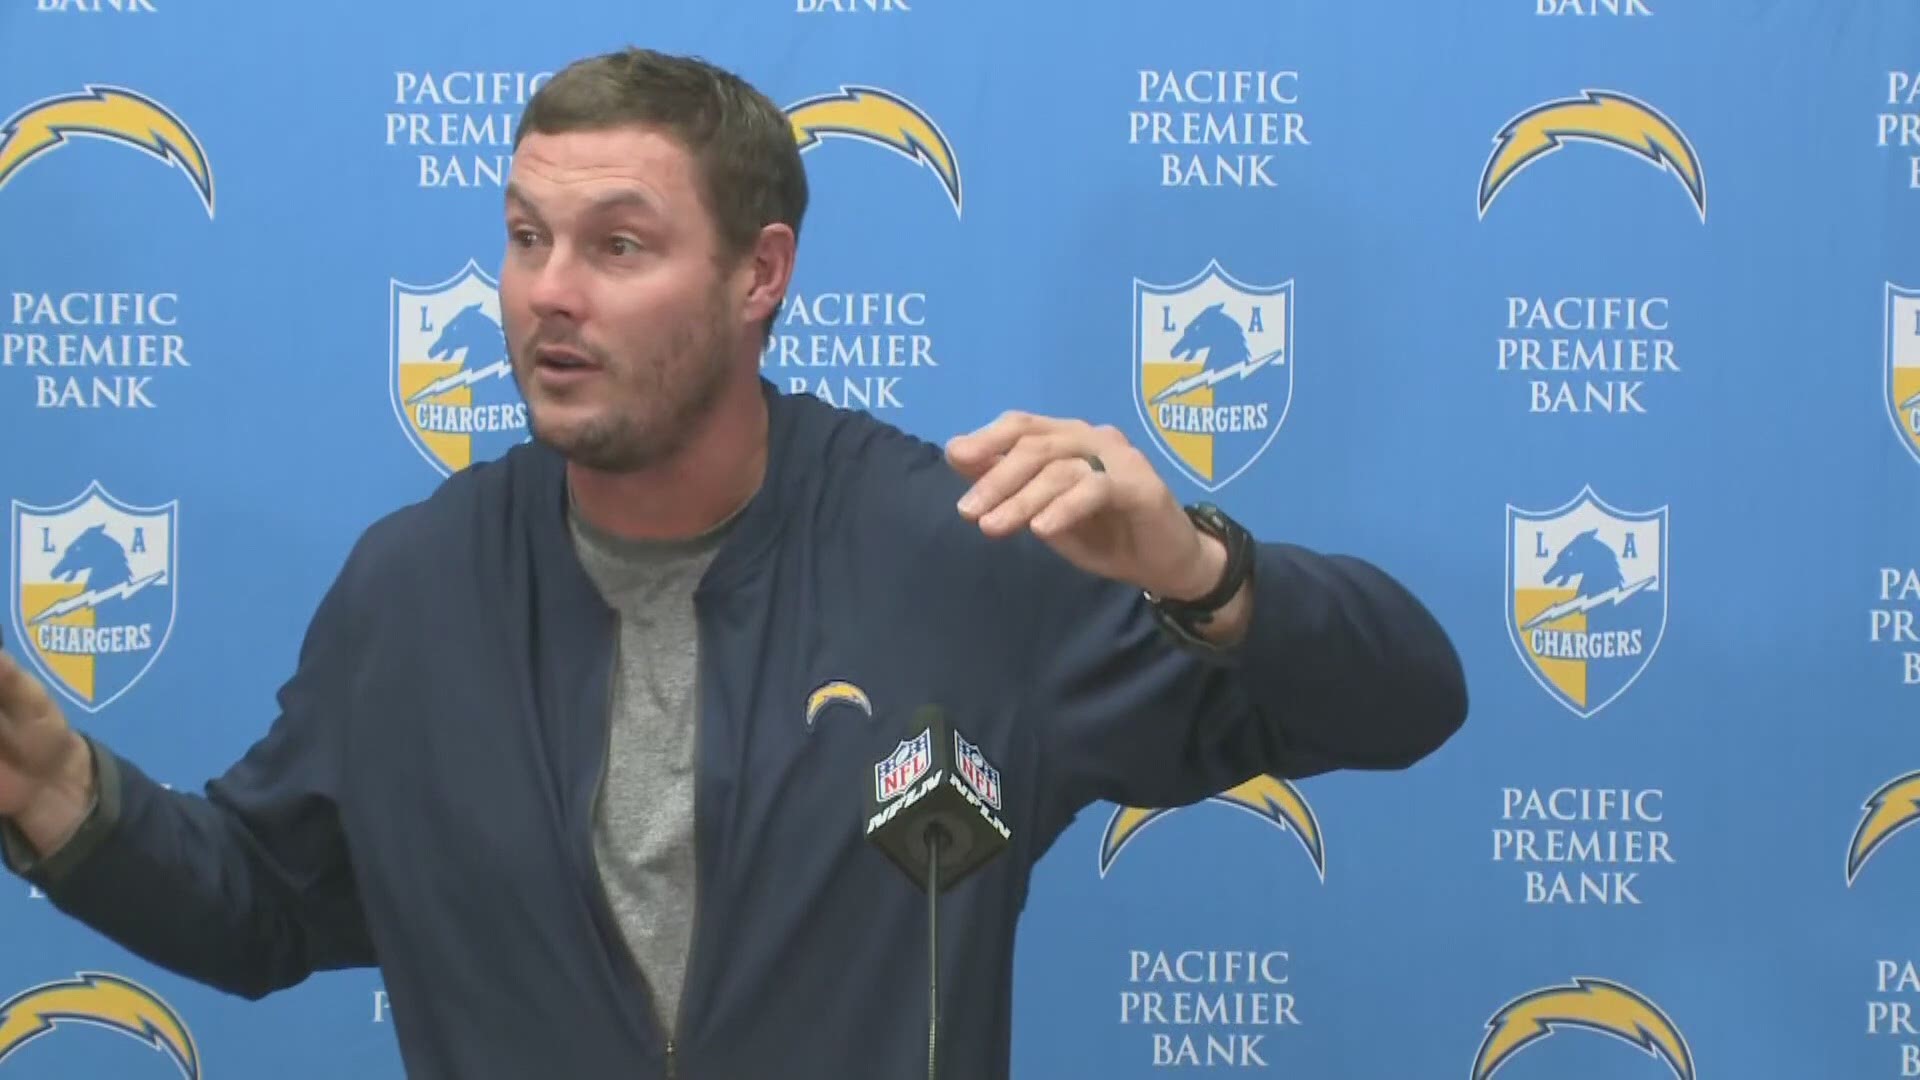 San Diego fans react to Philip Rivers potential end with Chargers